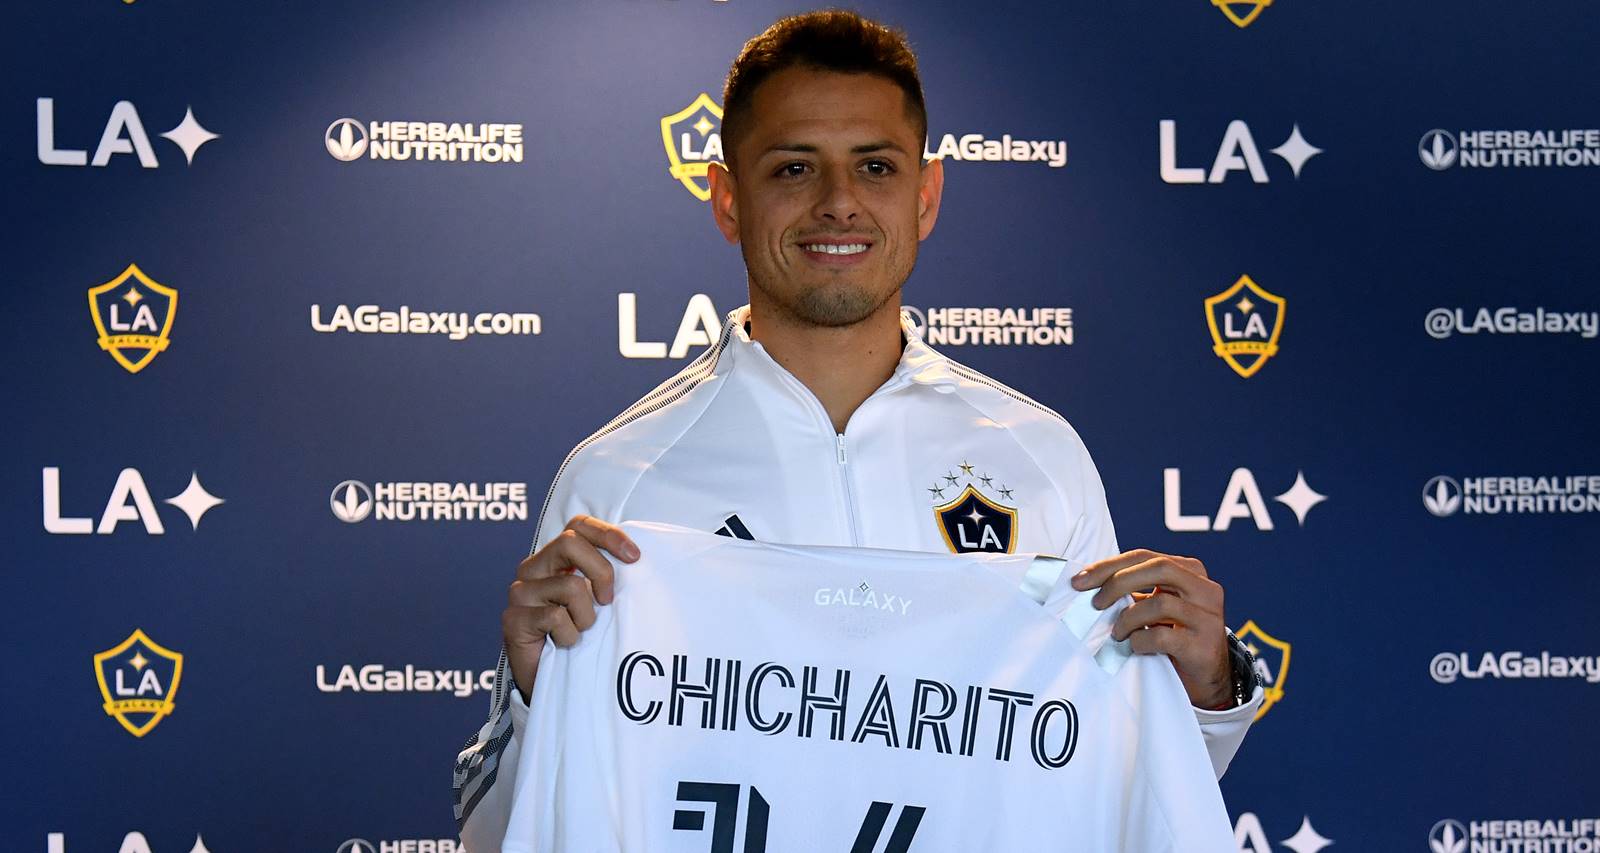 Australian Sarah Kohan Wiki, Age, Family, Education, Son and Facts About LA Galaxy Forward, Javier Hernández’s Wife